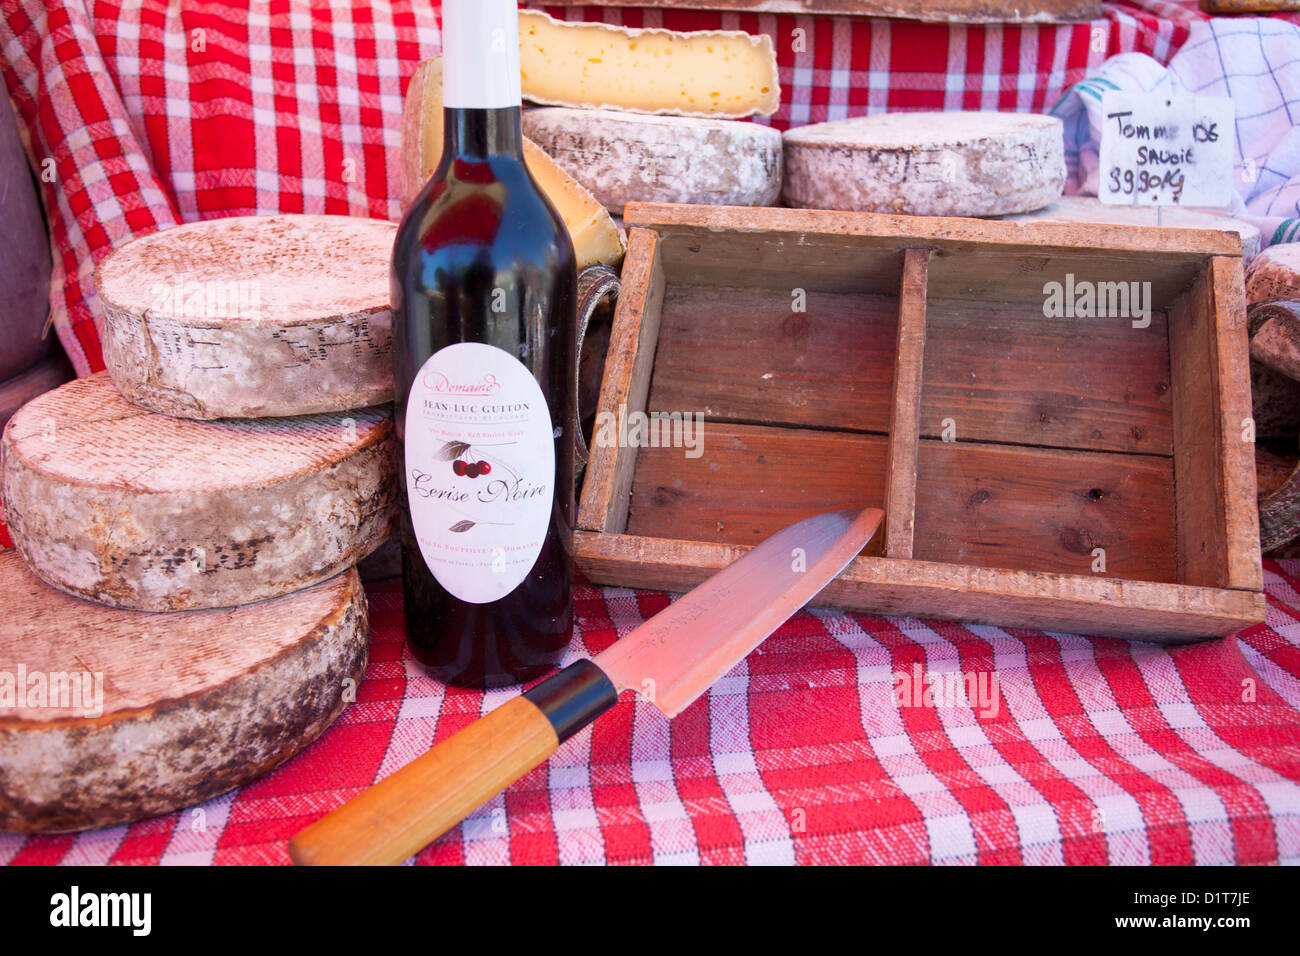 Cherry wine and cheeses for sale at market, Gordes, Provence France Stock Photo